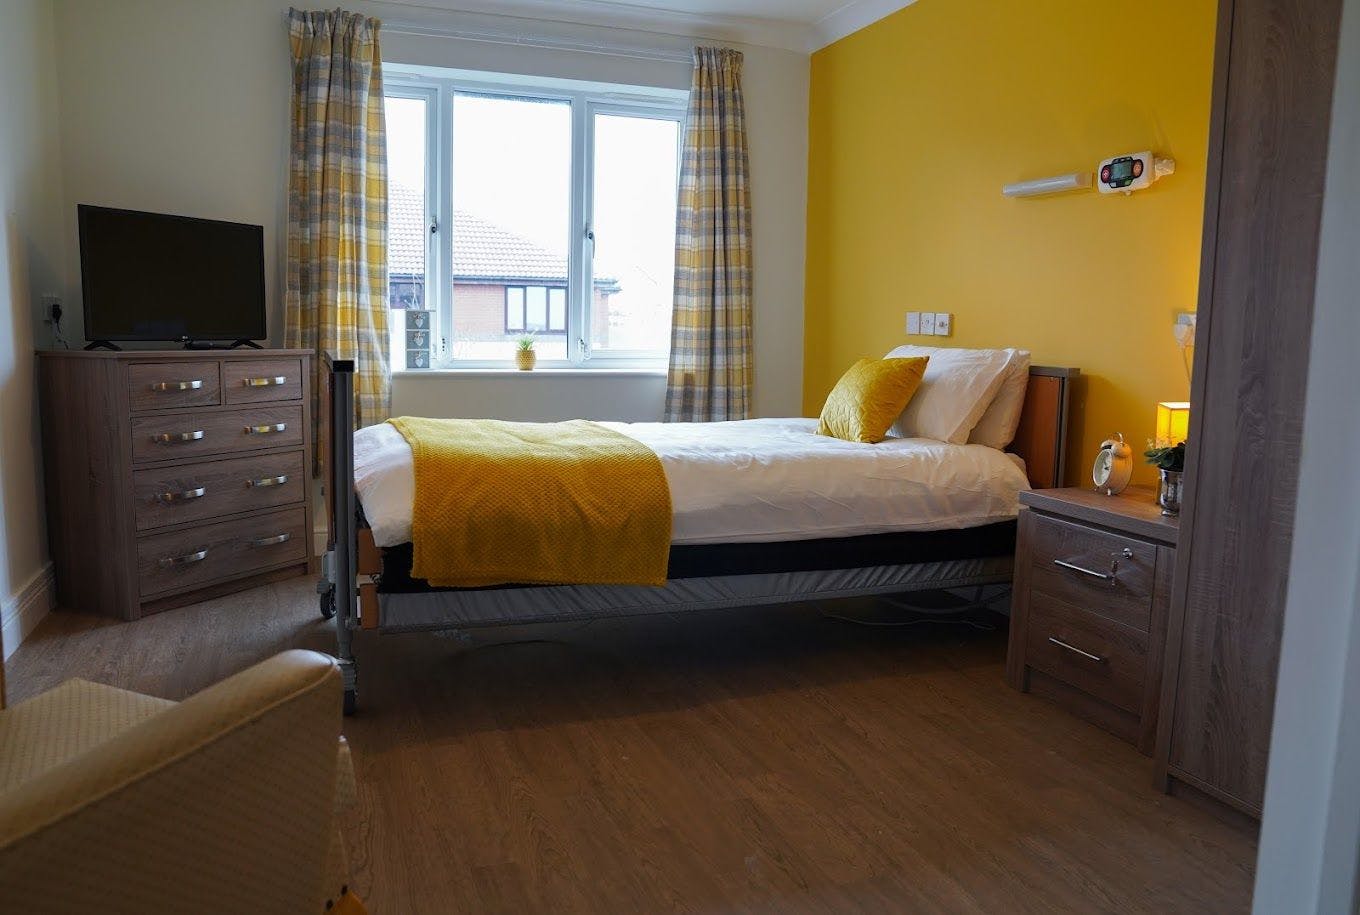 Bedroom at Cedar Court Care Home in Seaham, County of Durham